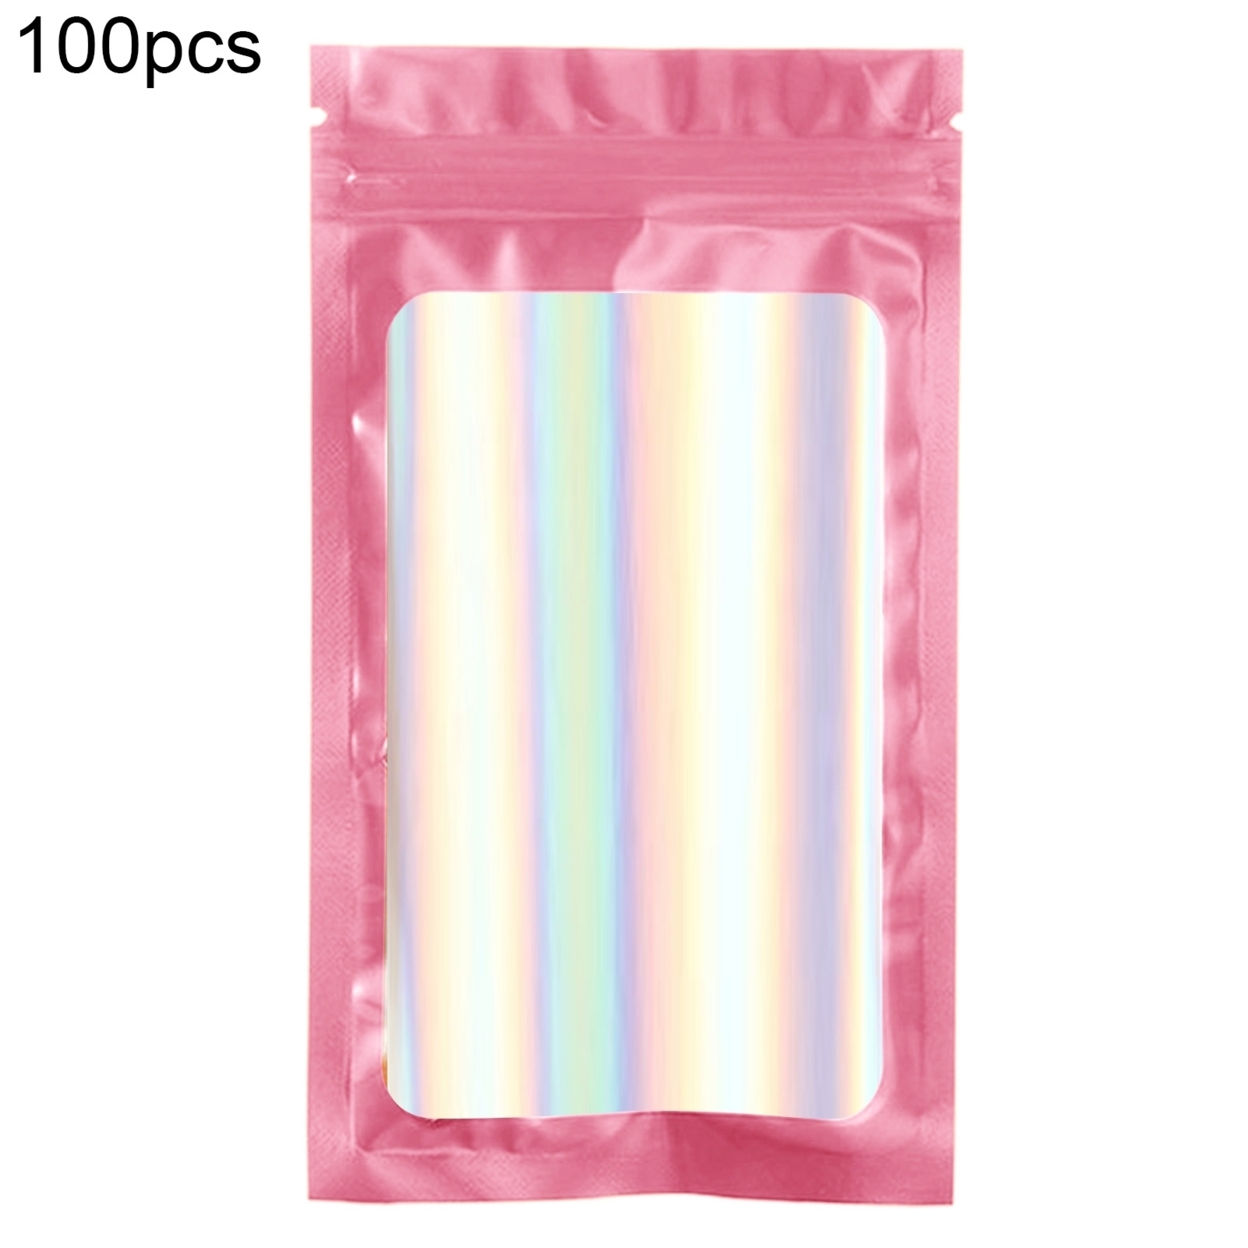 100Pcs/Set Zip-lock Bags Eye-catching Odor Proof Holographic Color Cosmetic Laser Packaging Bags for Kitchen - pink, 10*18cm